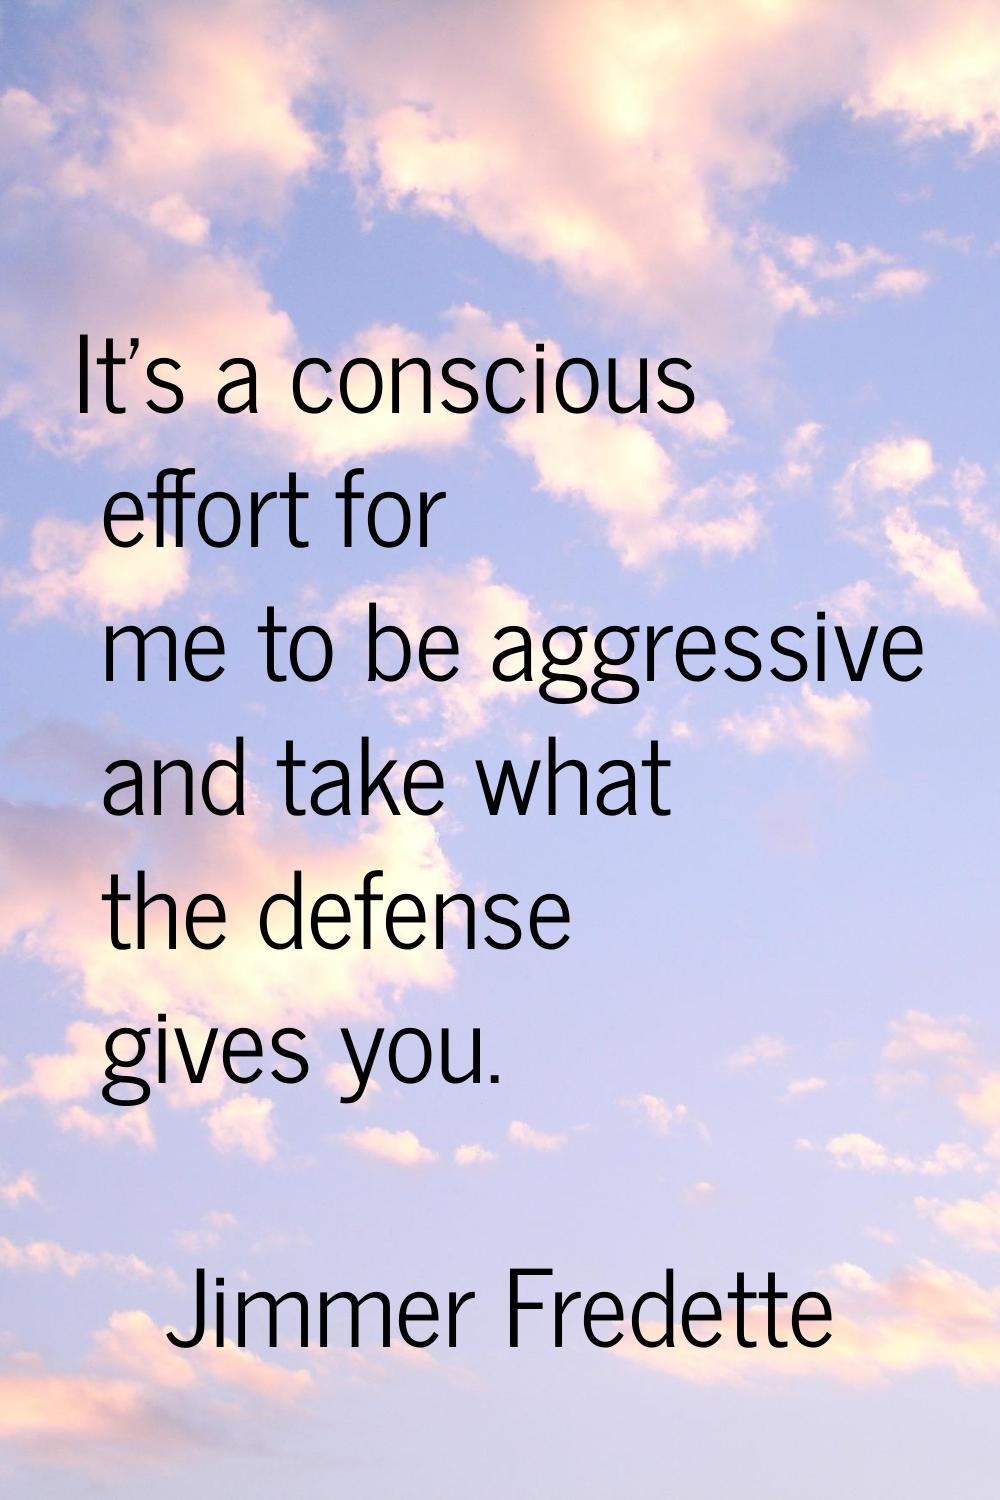 It's a conscious effort for me to be aggressive and take what the defense gives you.